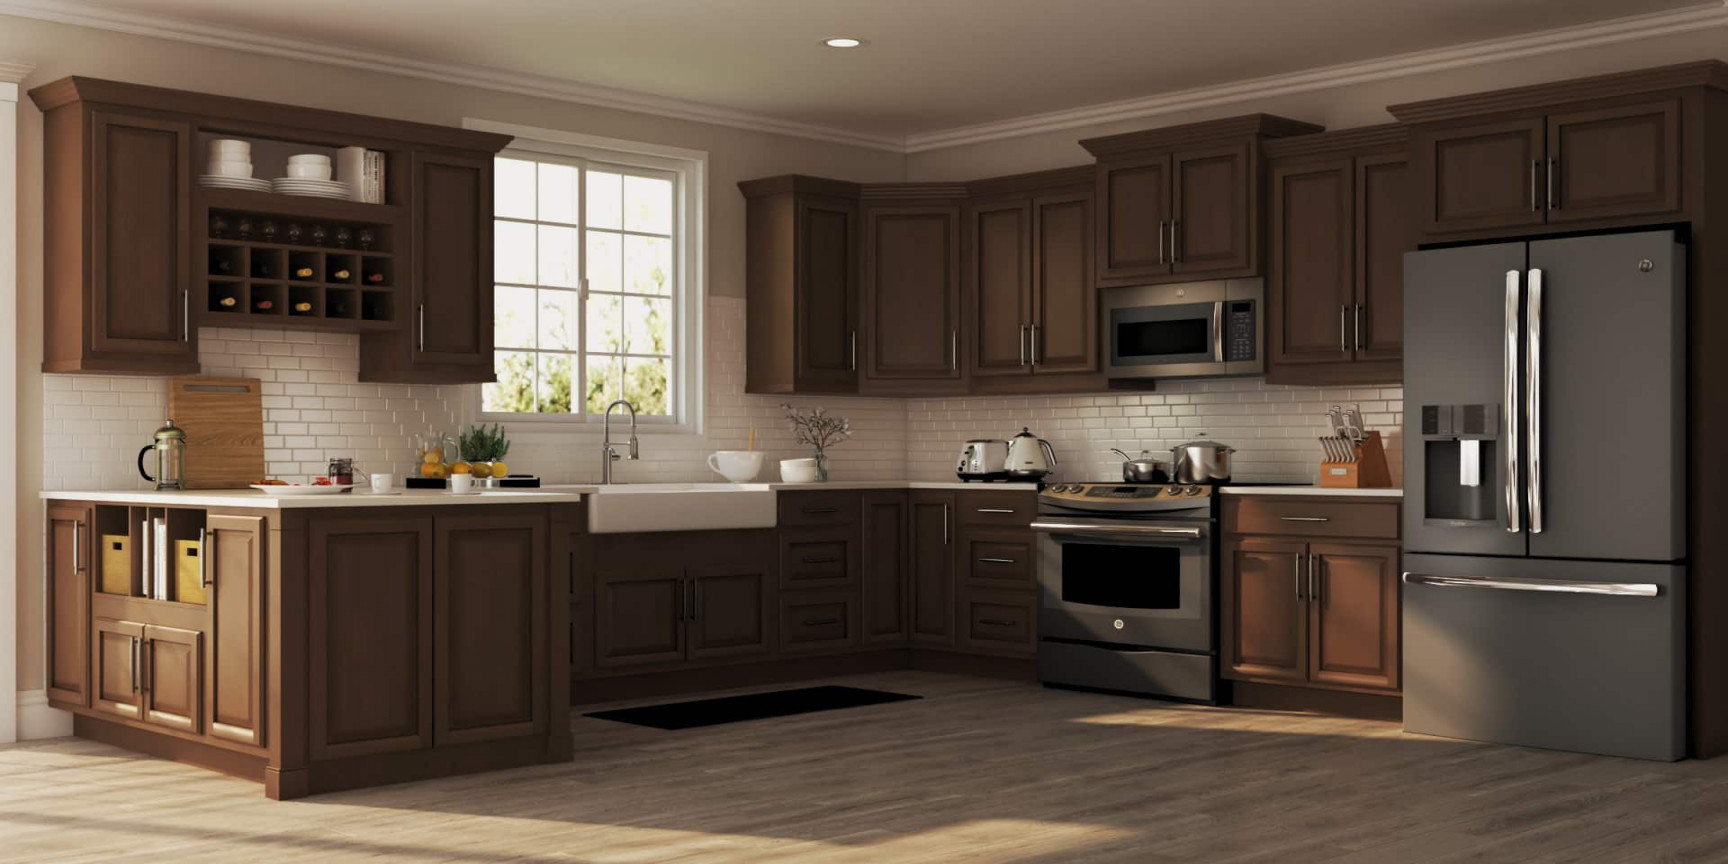 Hampton Wall Kitchen Cabinets in Cognac - Kitchen - The Home Depot